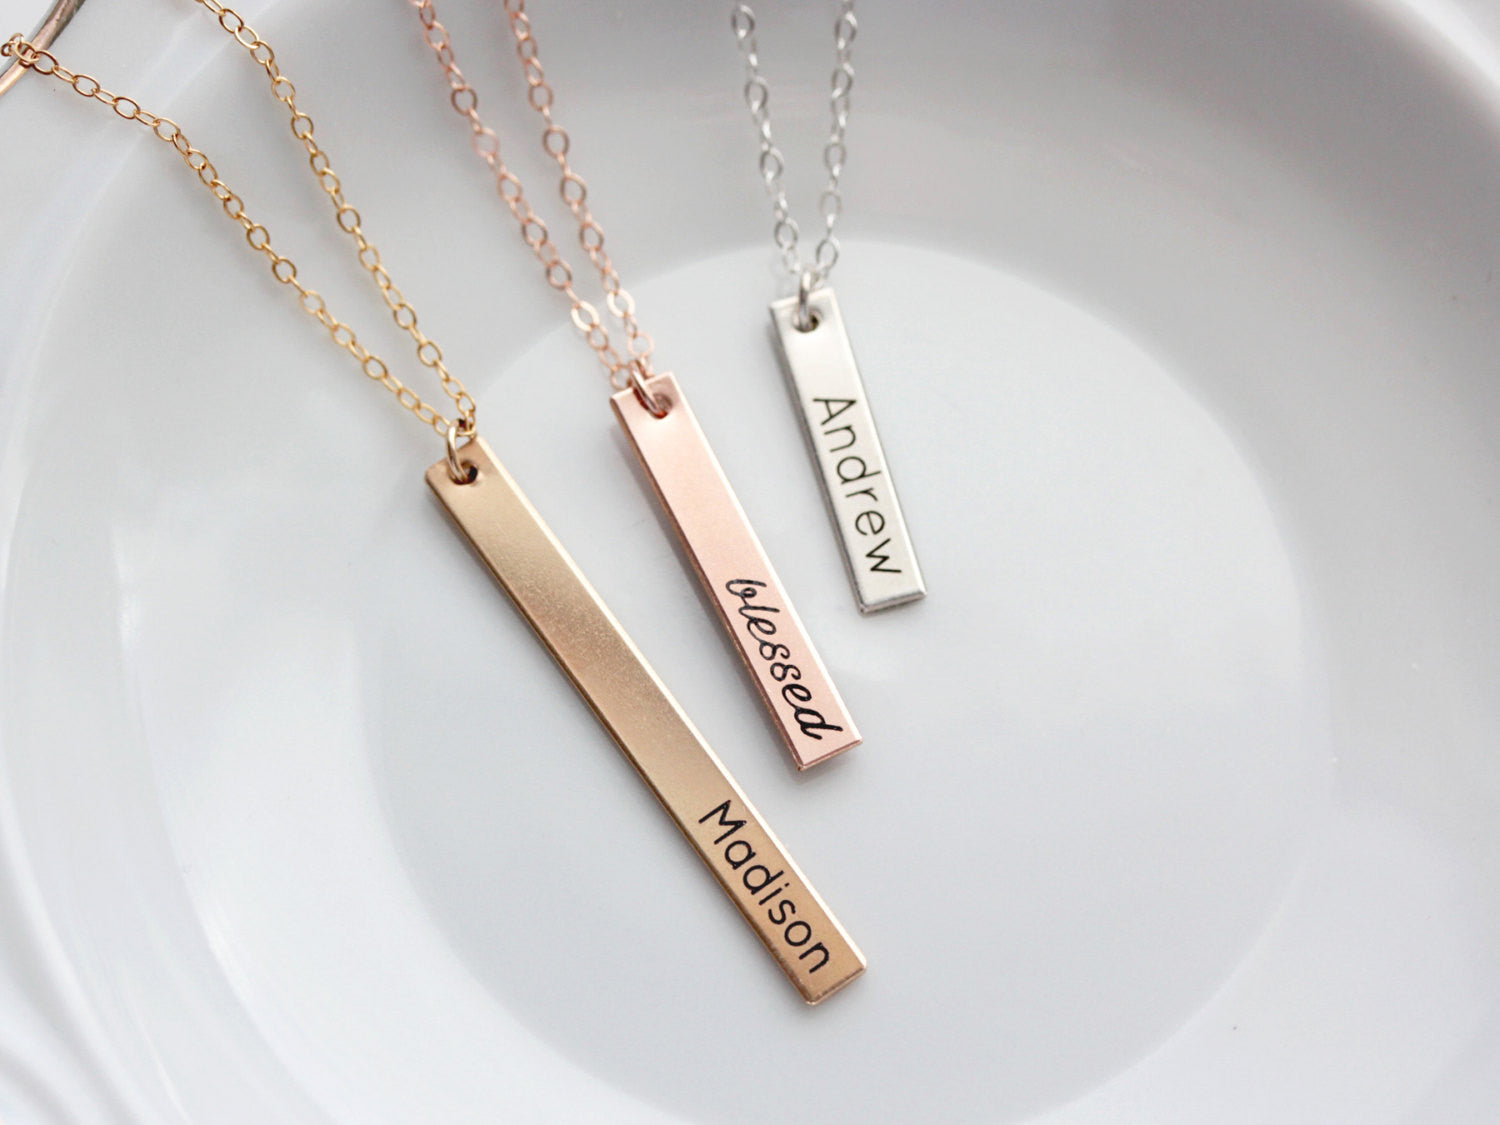 cat engraved Gold filled/Sterling Silver Bar Necklace/Personalized Name ID  / Customized text message Necklace/ cat lover/animal lover